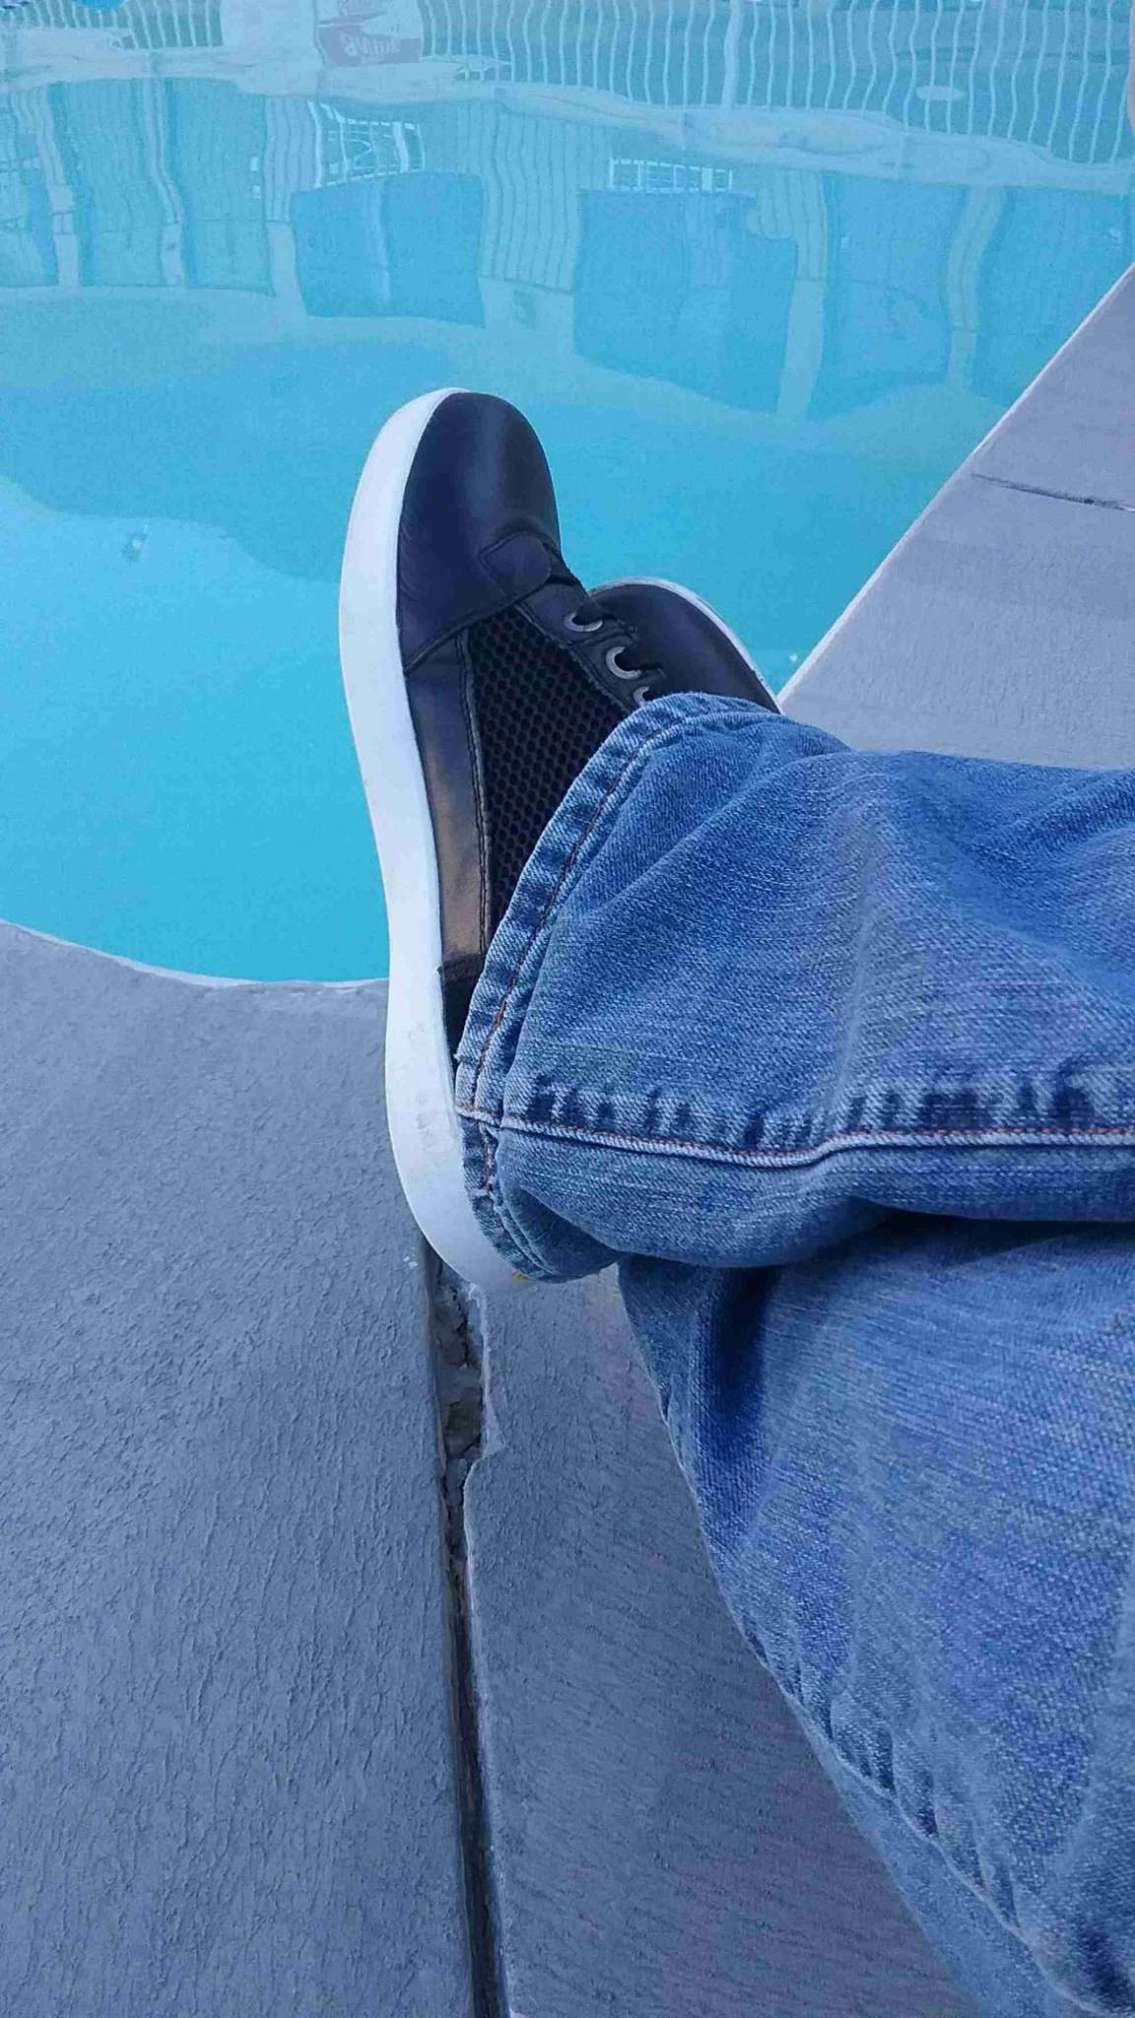 A man's feet, crossed at the ankles, is shown in the foreground. He's wearing the Mesh Hi-Top Sneakers from Indian Motorcycle, and they appear comfortable and relaxed. In front of him is the corner of a motel pool, the water inviting and blue.